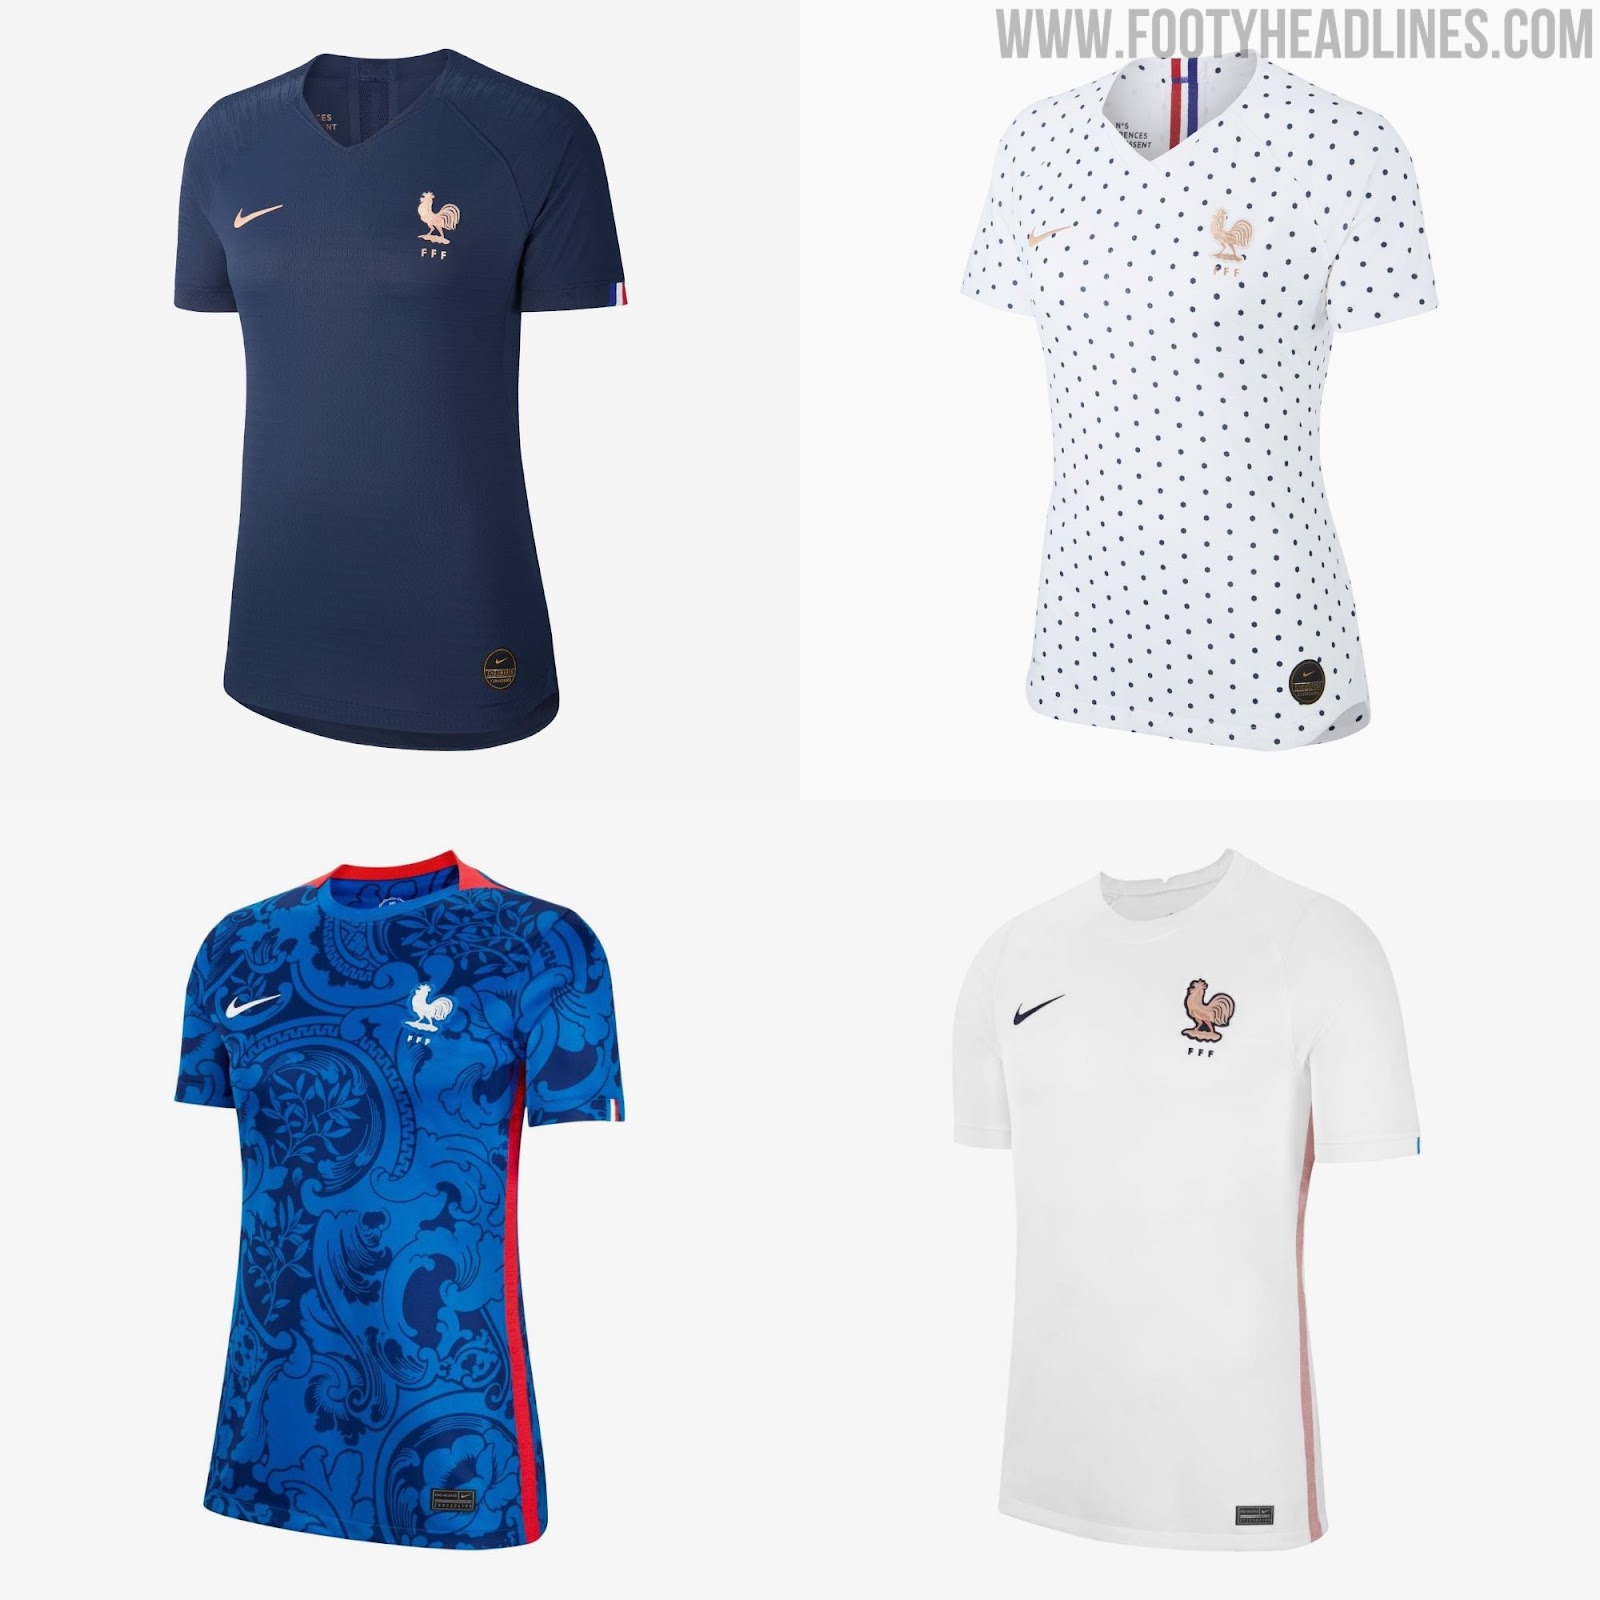 Exclusive Nike France 2023 Women's World Cup Kits to Feature Special